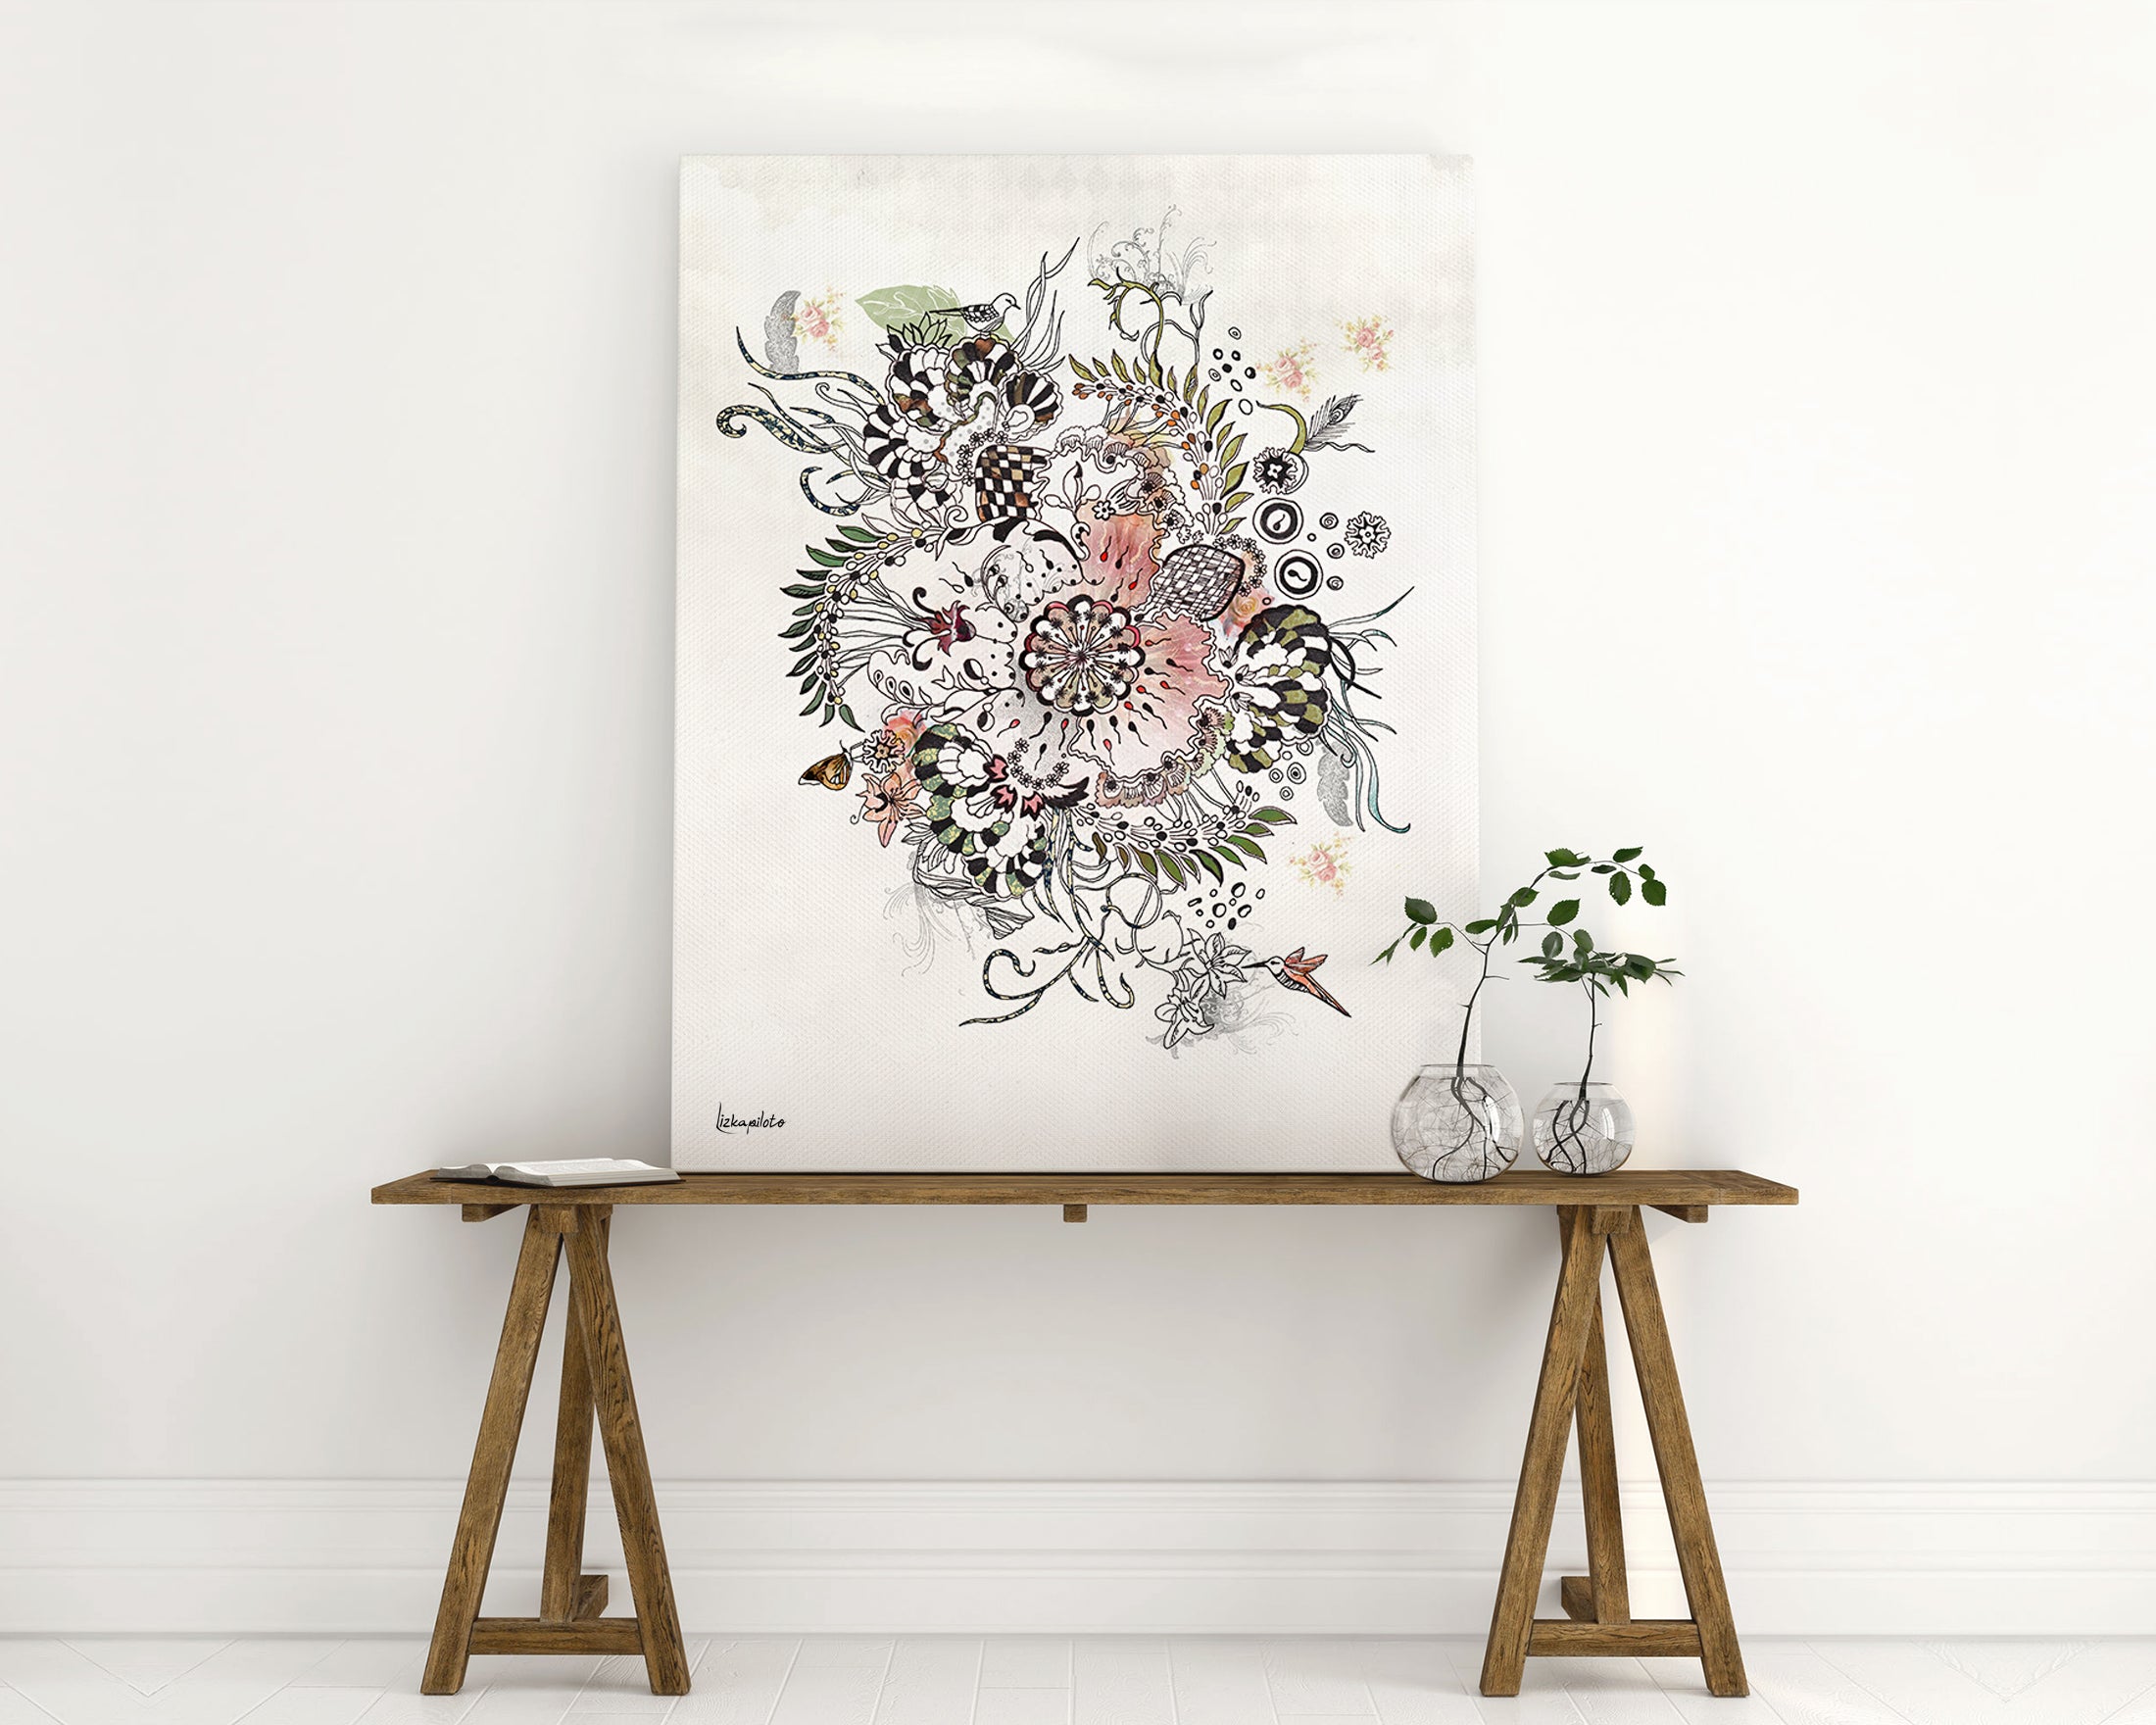 Abstract mandala painting, with plants and birds - made with black ink pen and watercolors